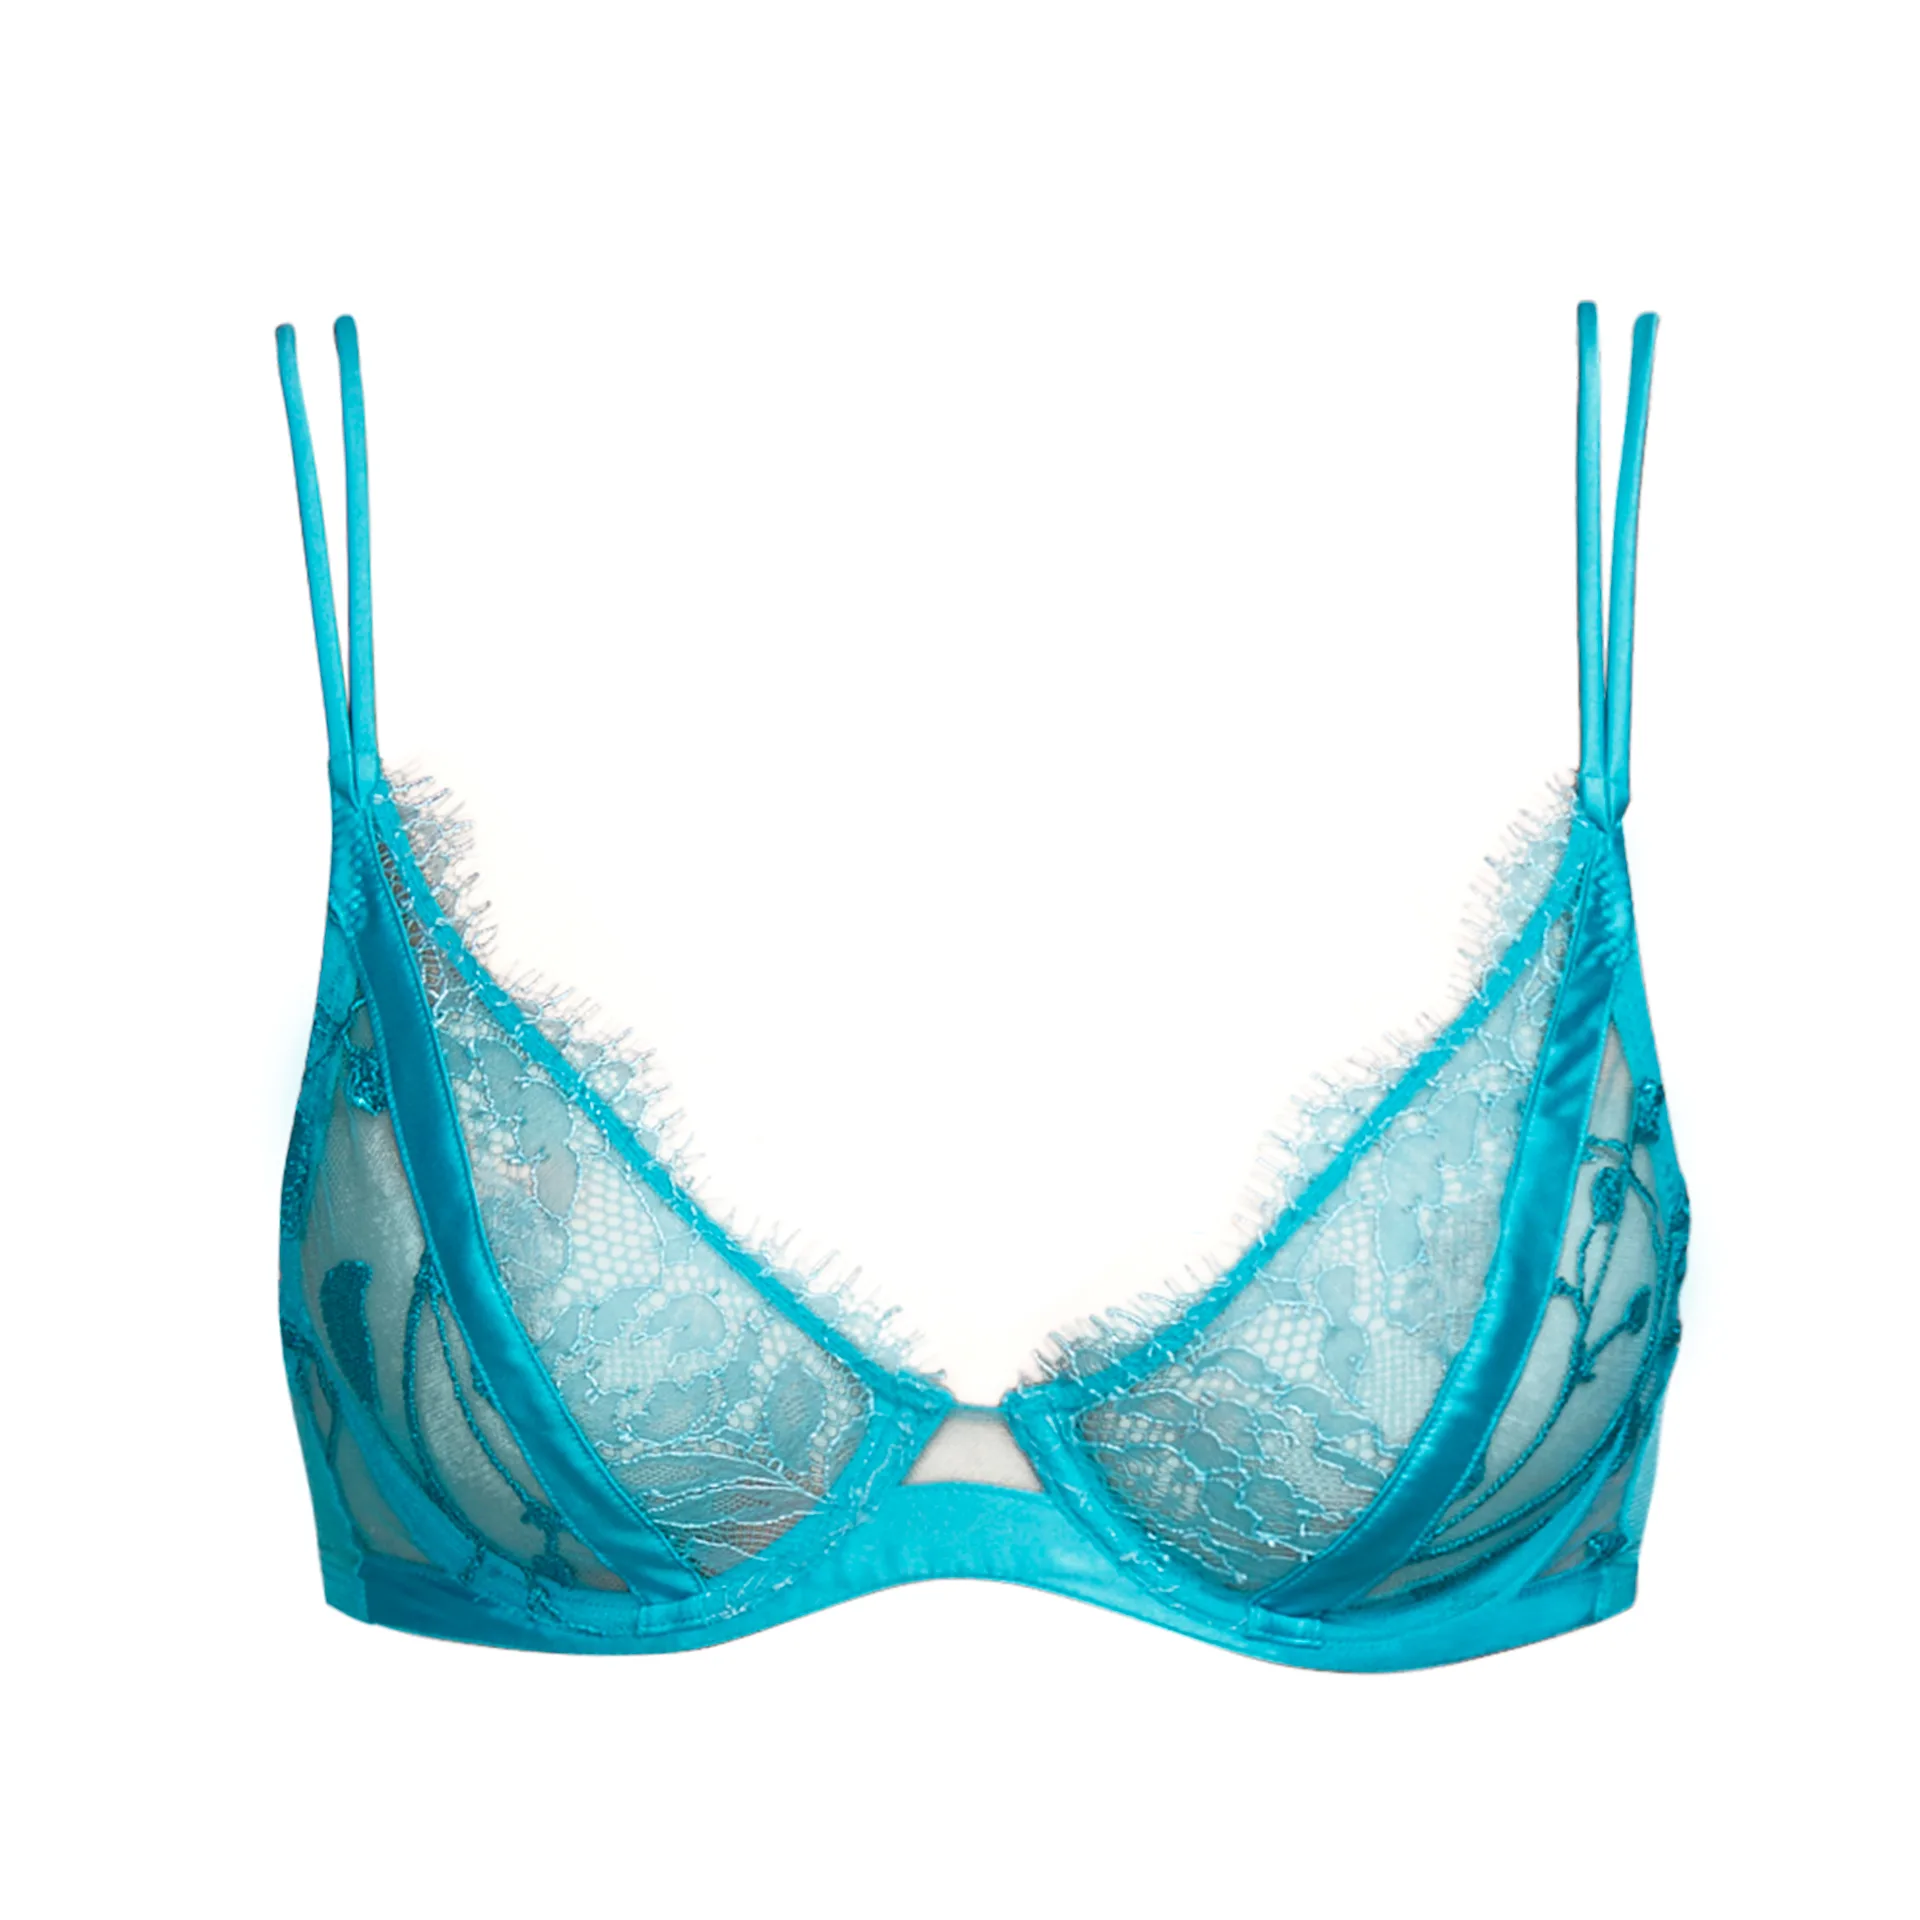 Andres Sarda Mamba Majestic Blue Full Cup Wire Bra